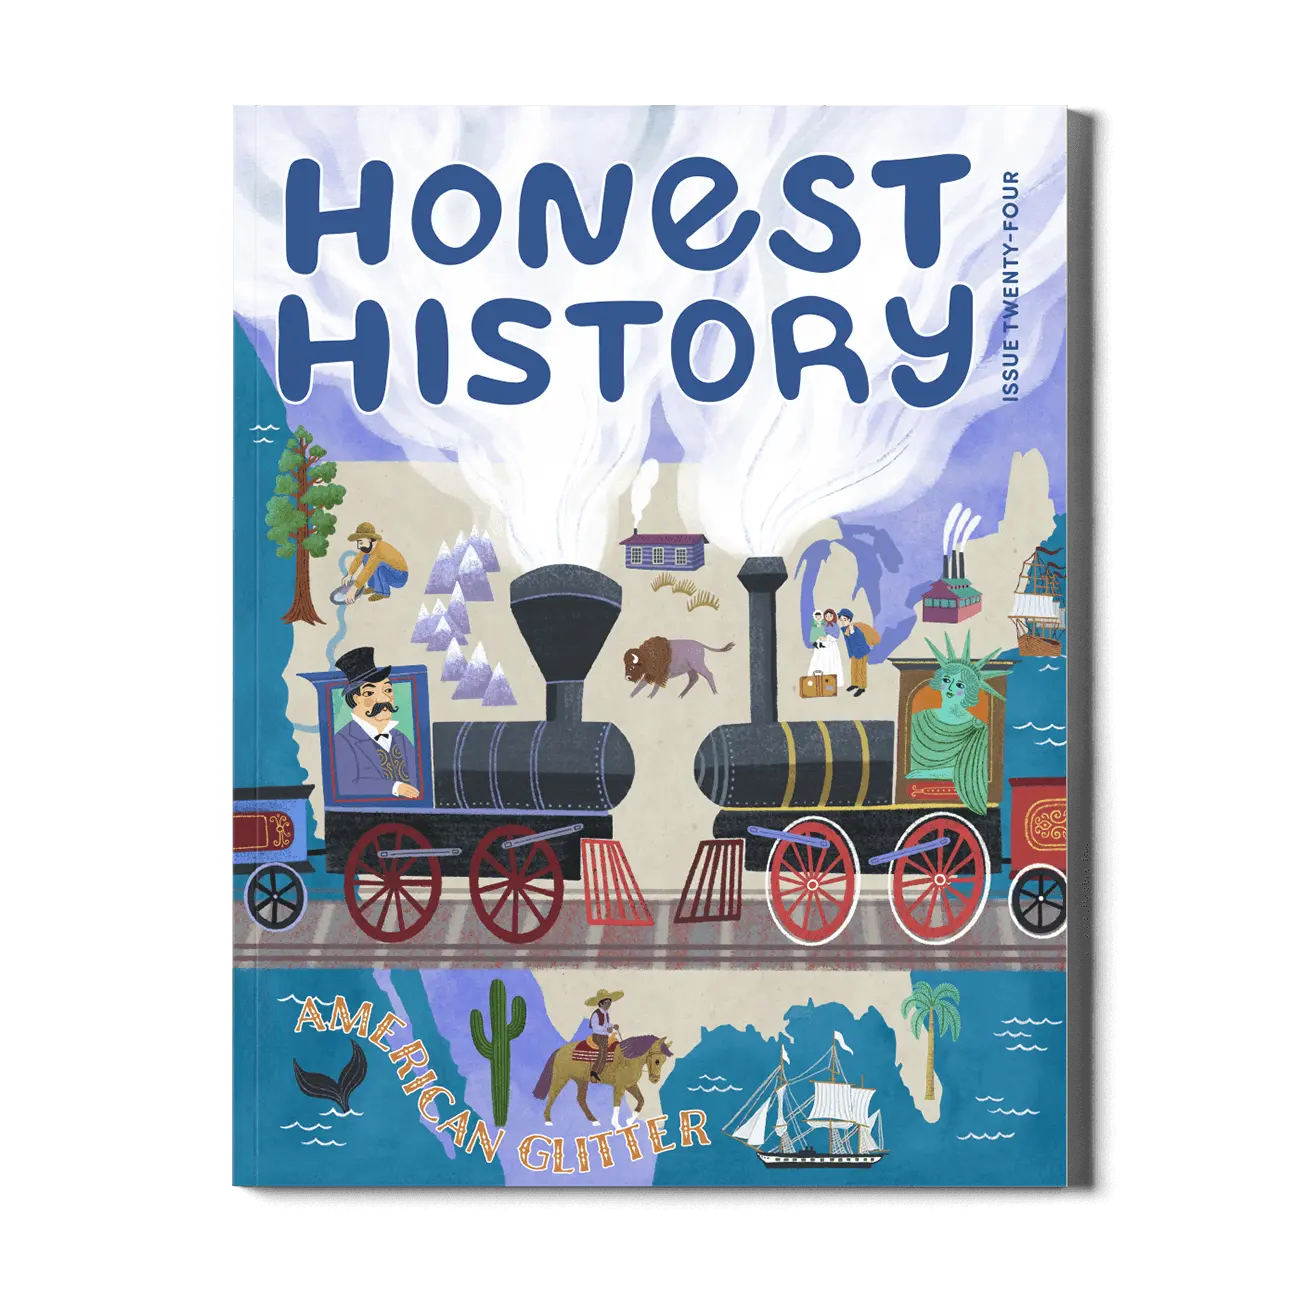 Honest History magazine Issue 24 cover featuring the Gilded Age of America for kids